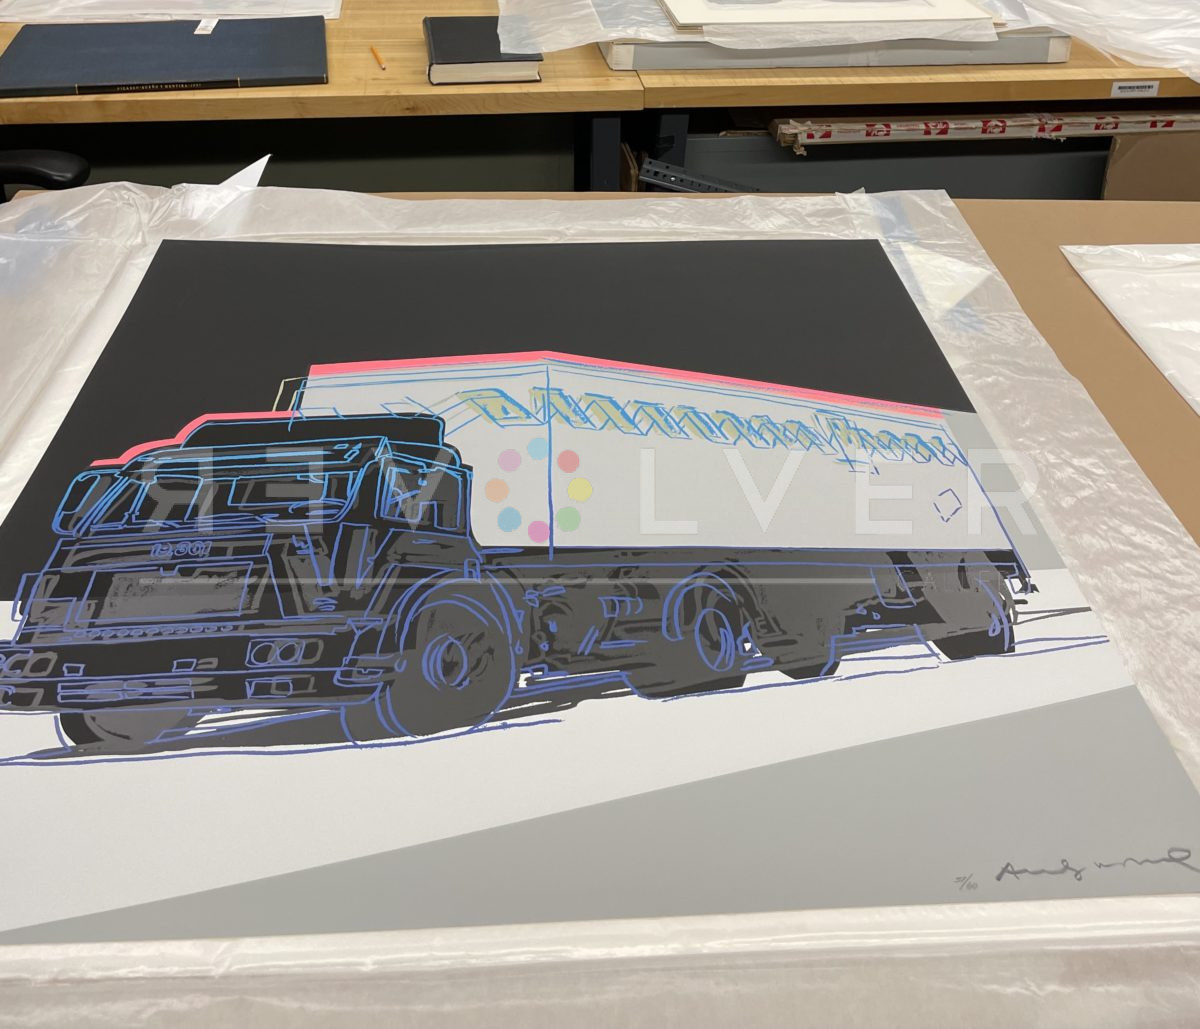 The truck 370 screenprint out of frame